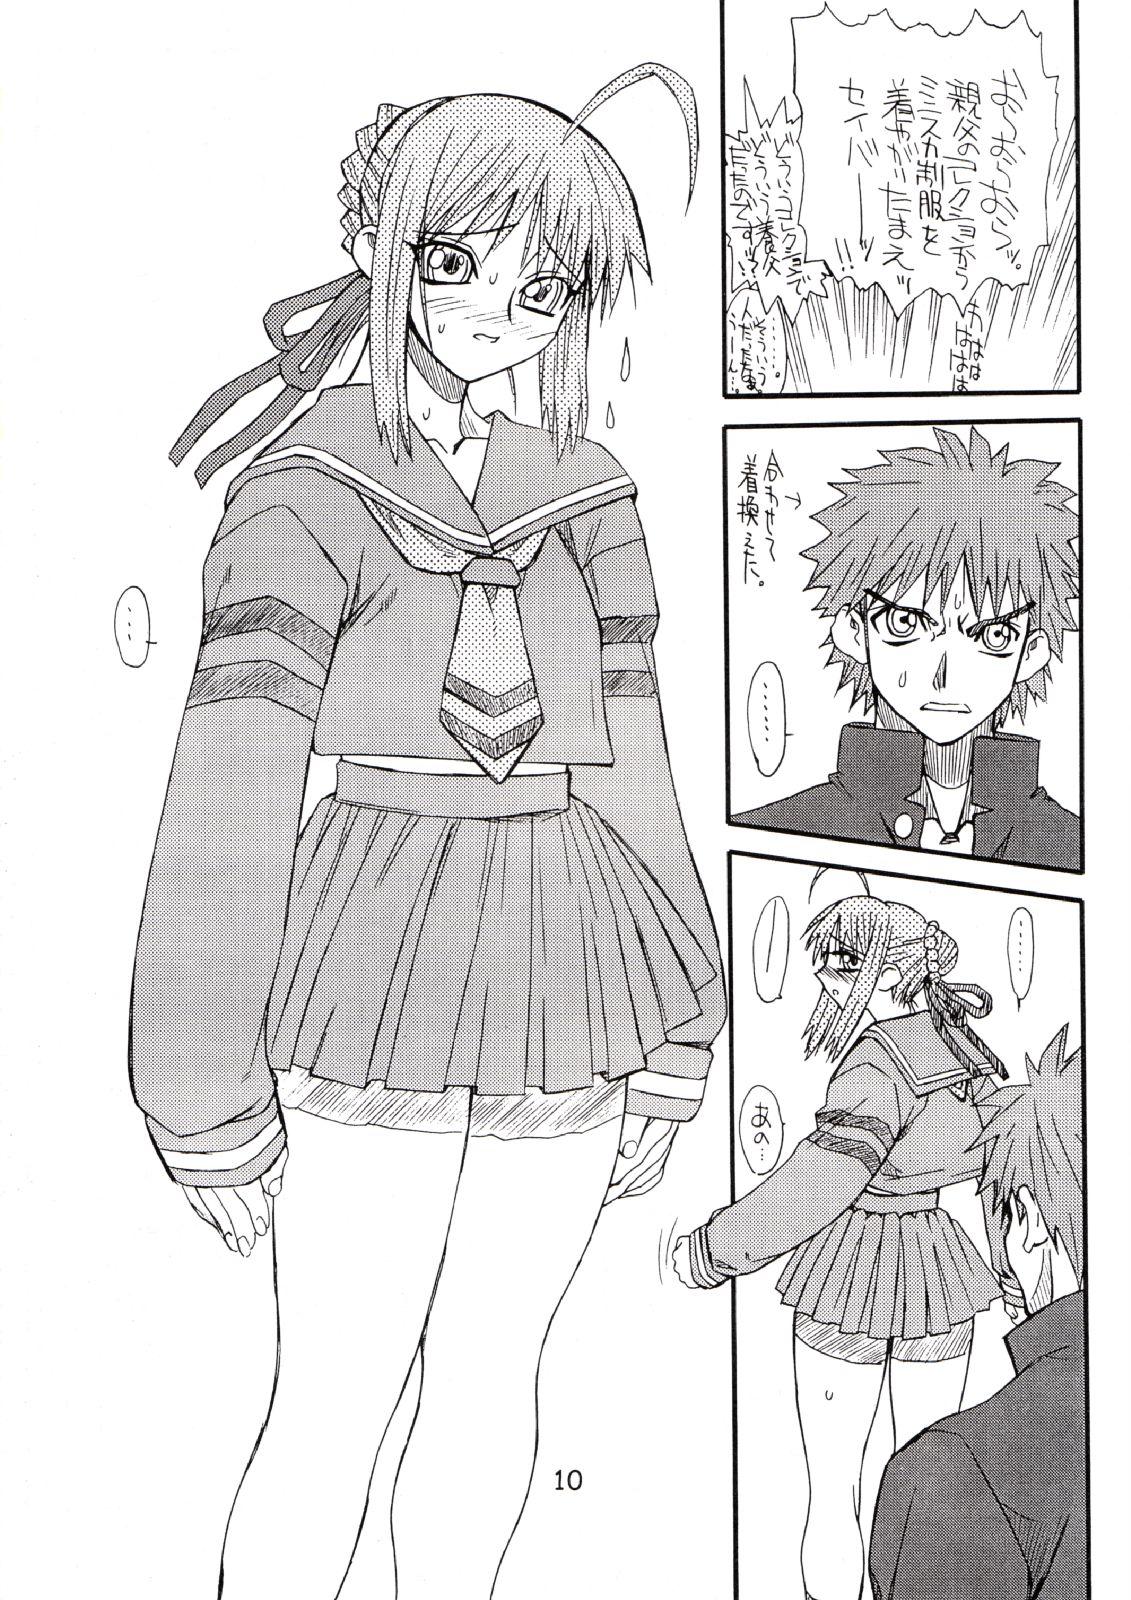 Exotic Corn 2 - Fate stay night Internal - Page 9